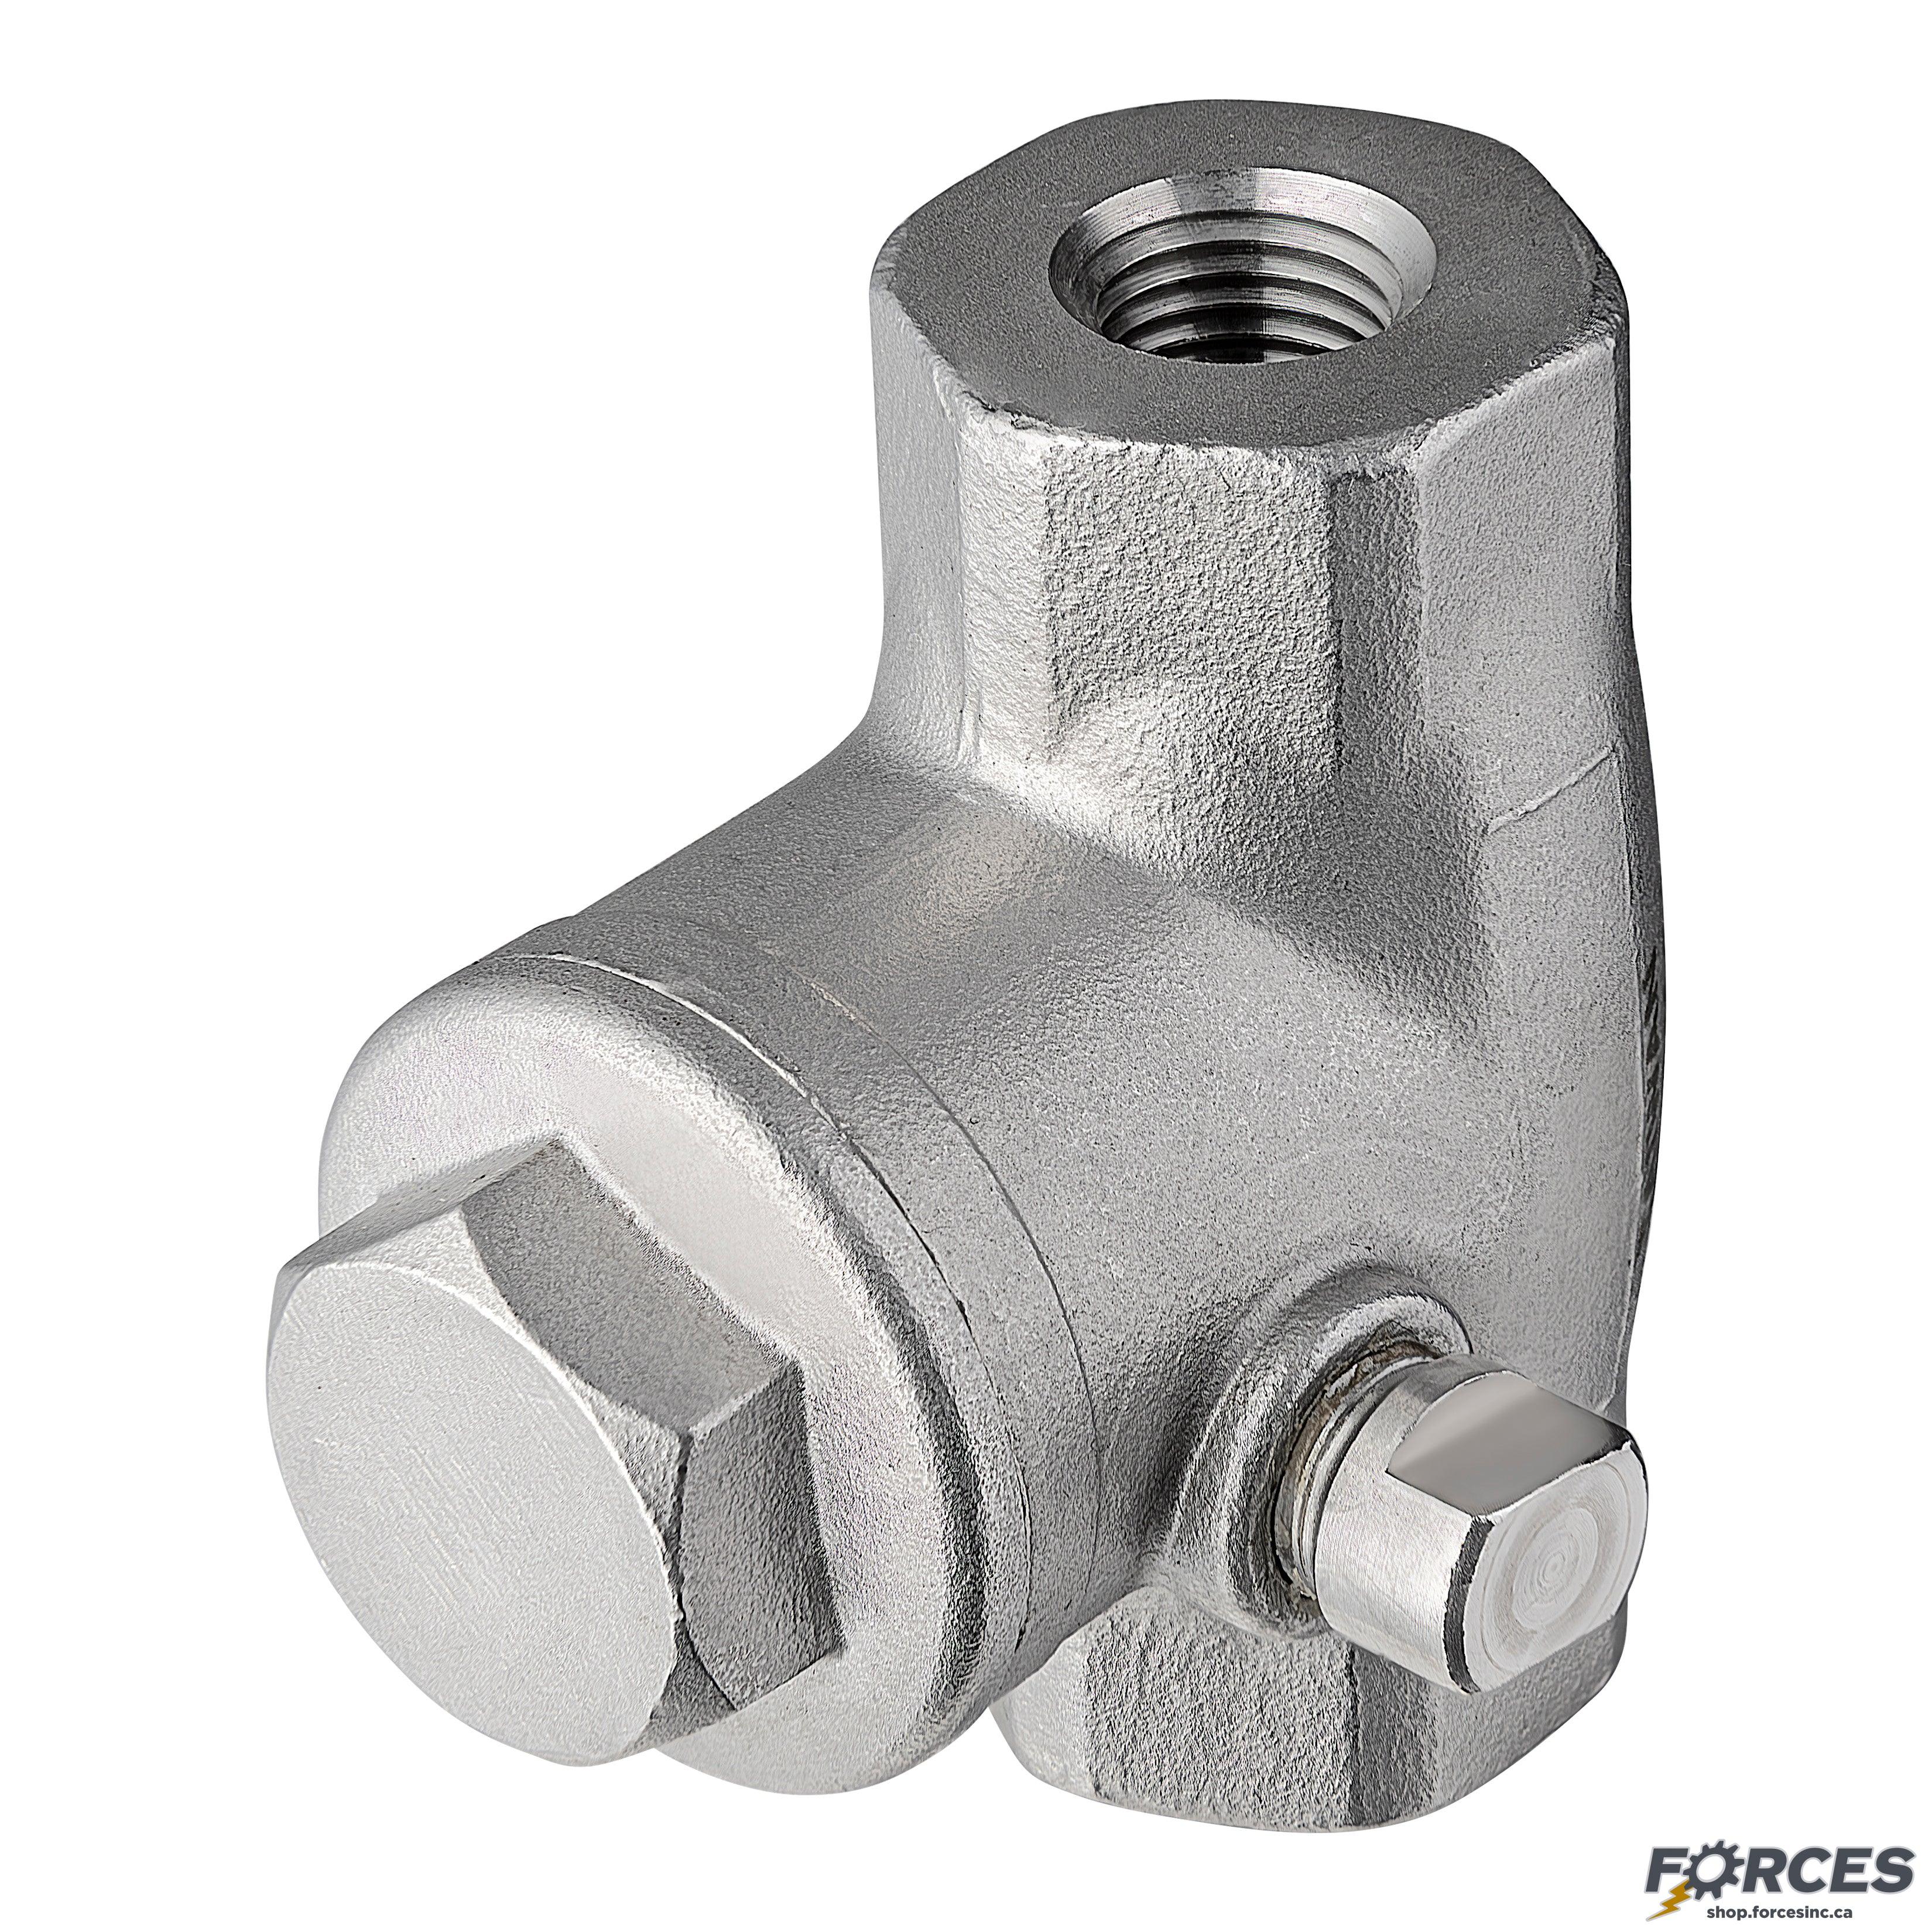 1-1/2" Swing Check Valve NPT #200 - Stainless Steel 316 - Forces Inc